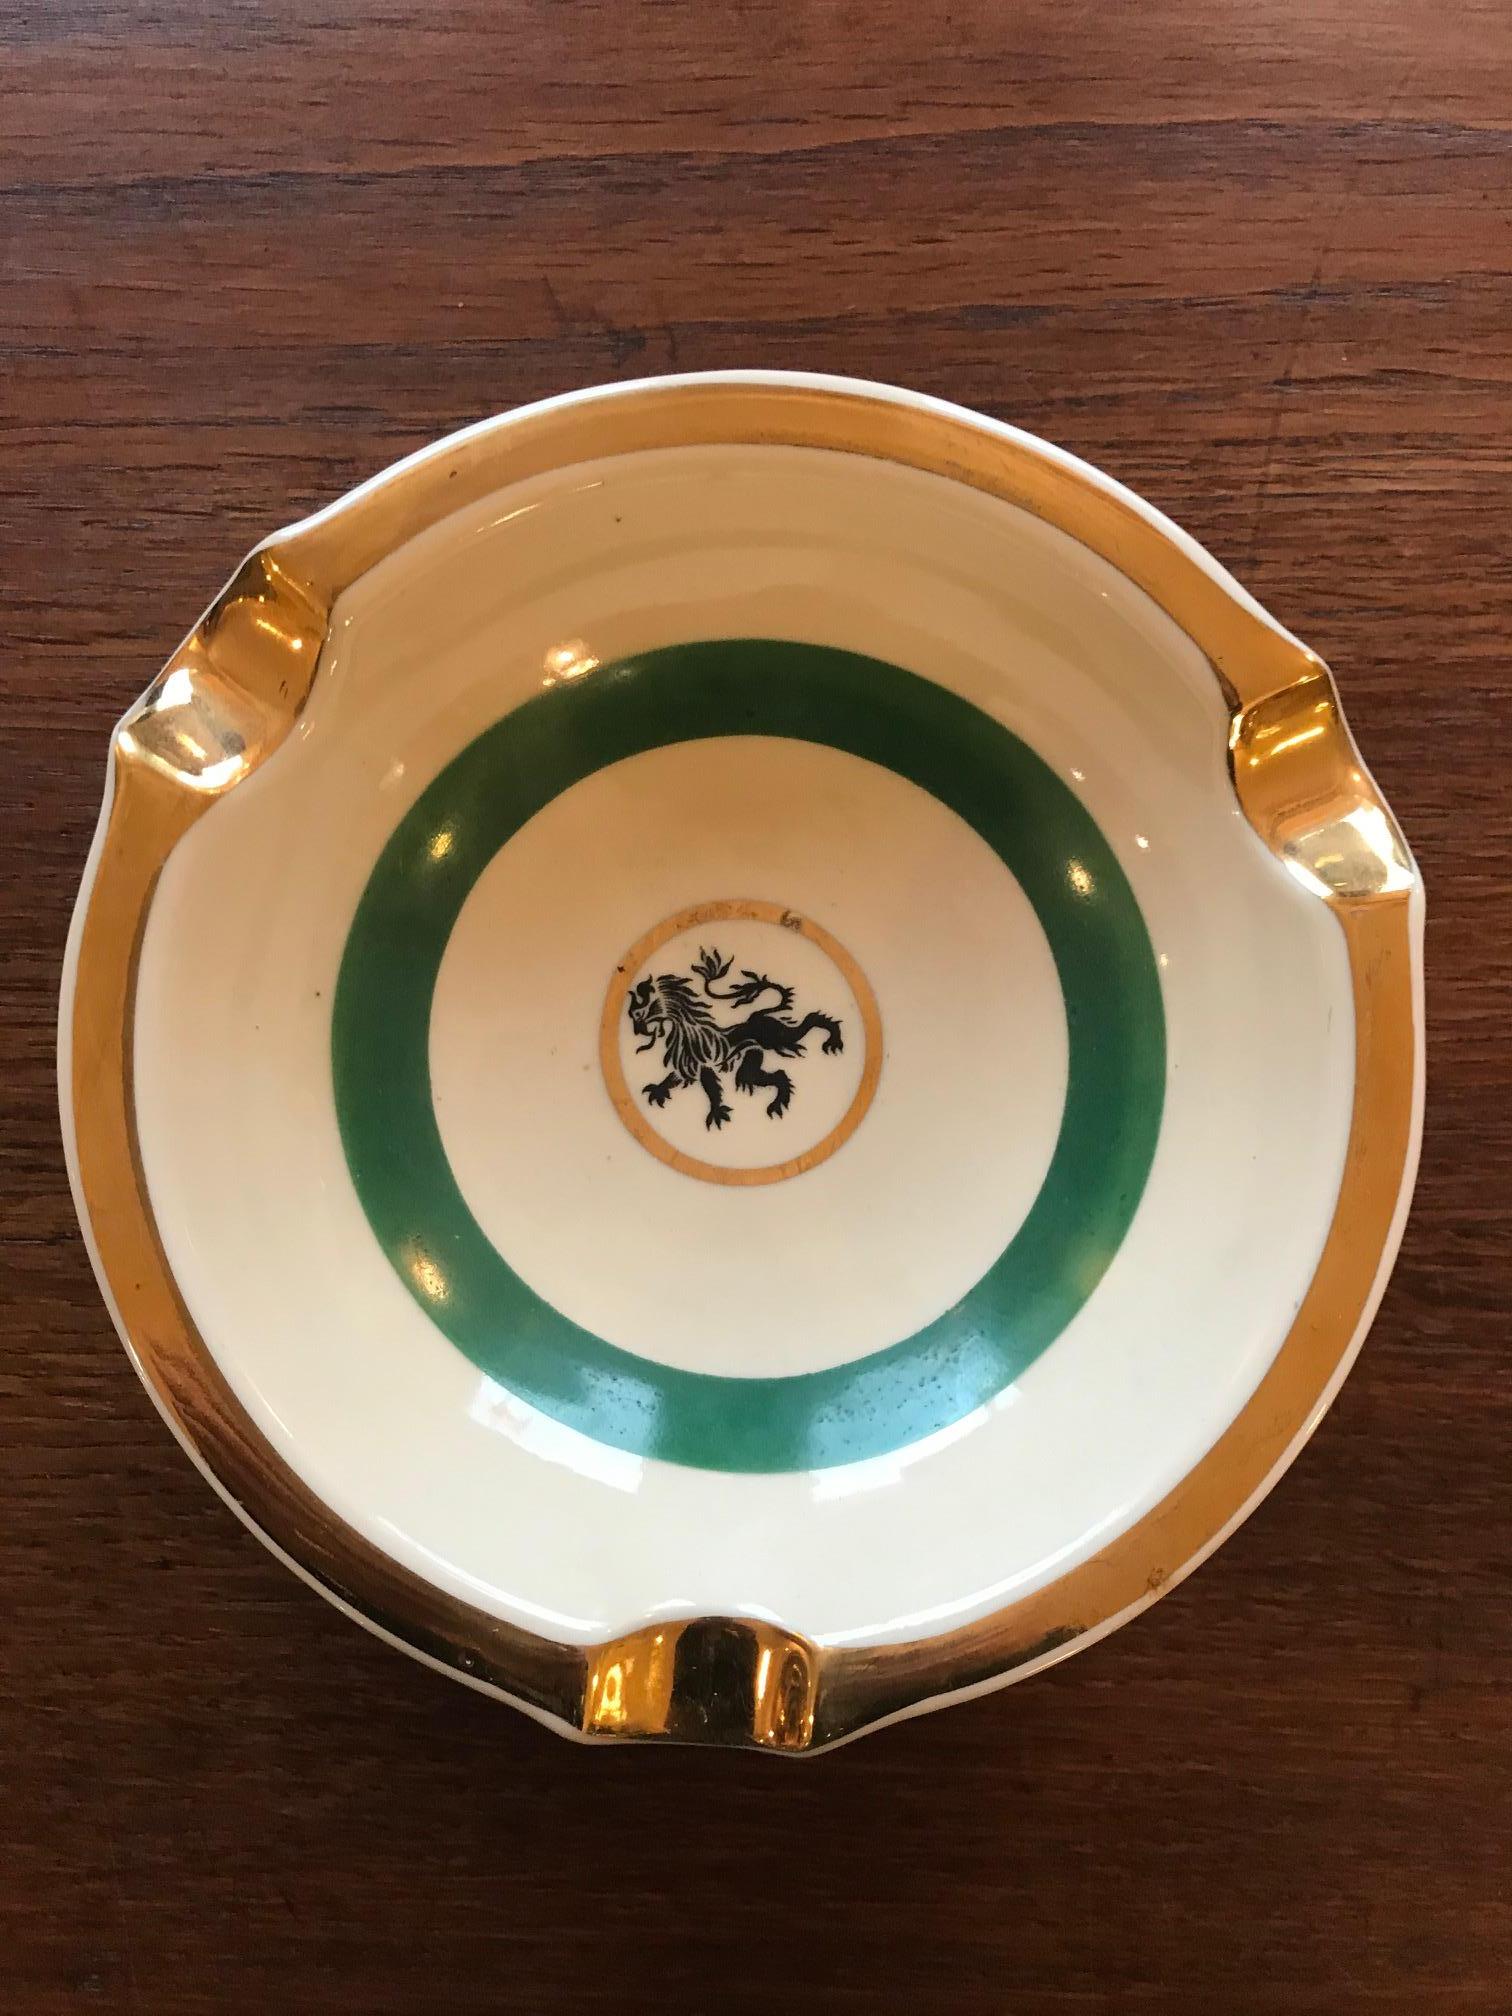 Very nice 20th century French ceramic ashtray from the 1950s. Green and gold color. 
A lion is designed in the center of the ashtray because it's the symbol of the city of Lyon (South east of France).
It was a gift from a French (Lyon) bank to its